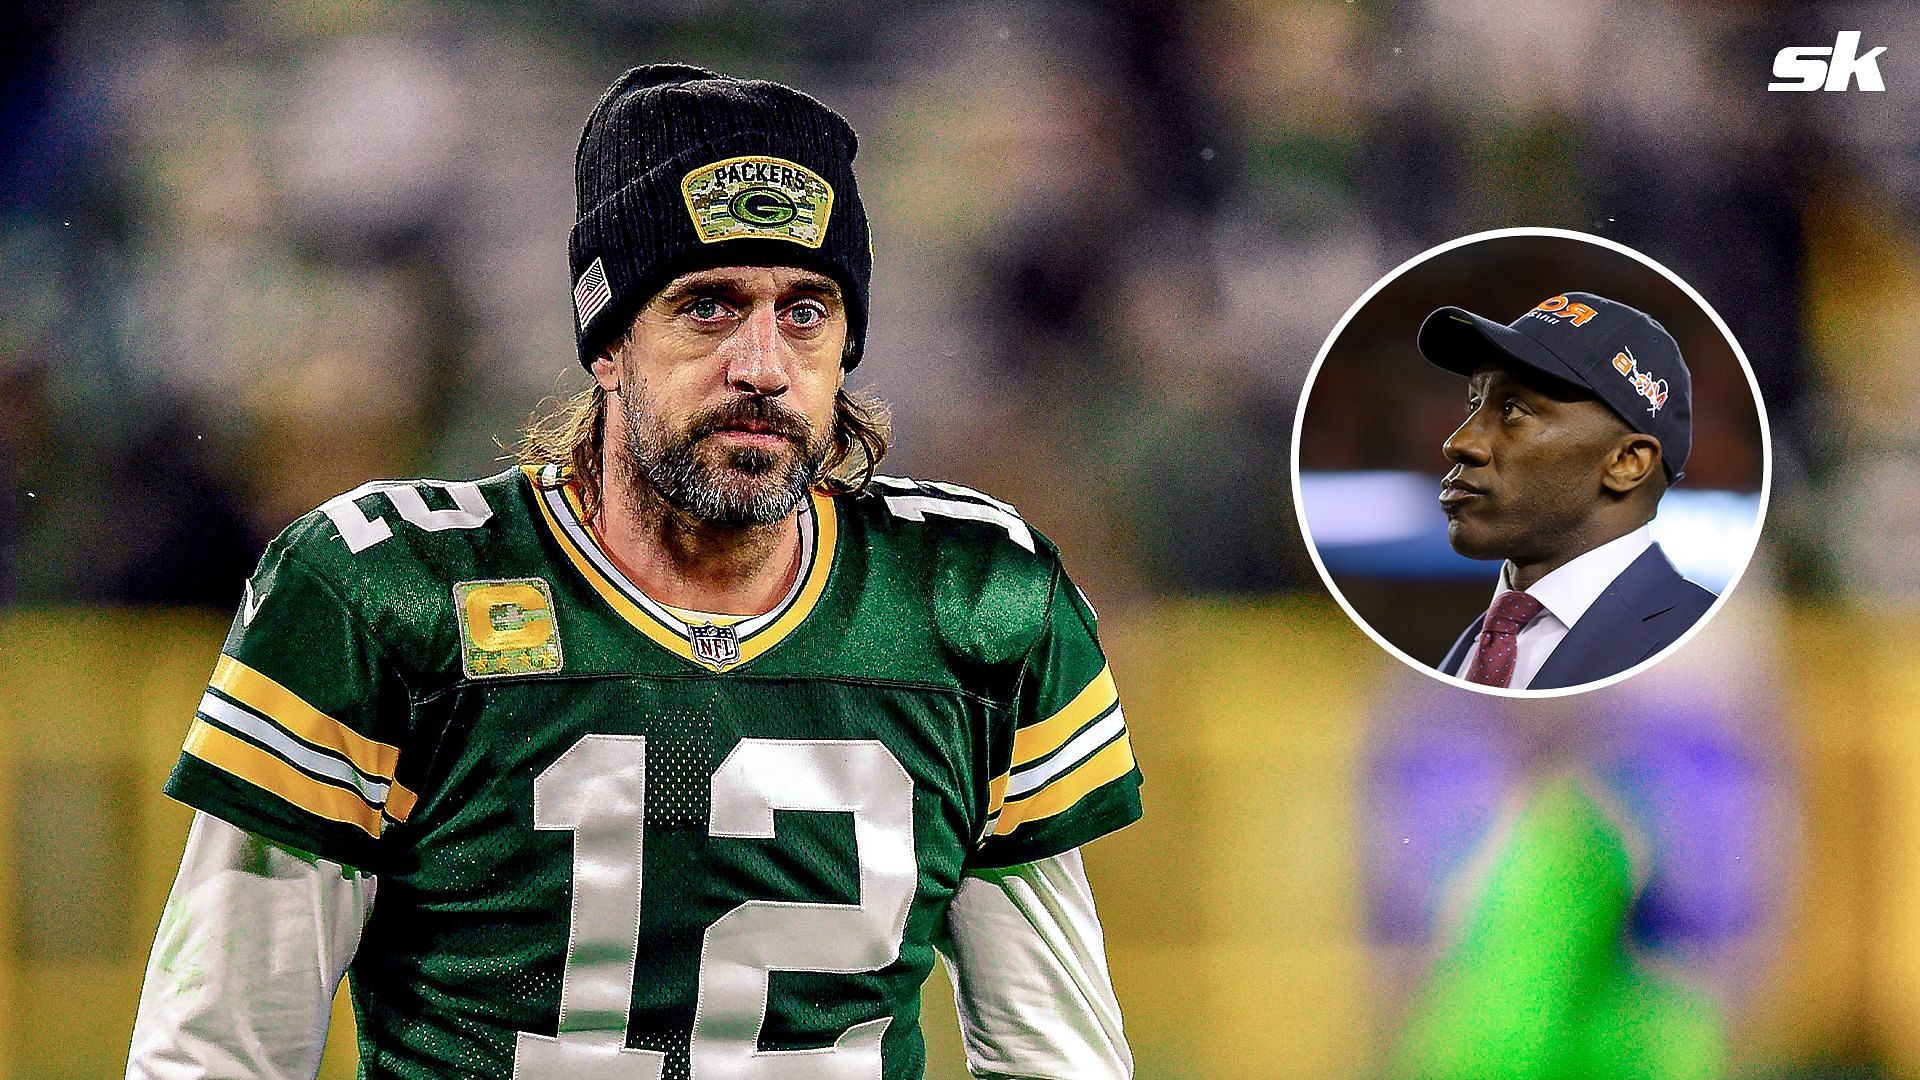 Shannon Sharpe has spoken about Aaron Rodgers